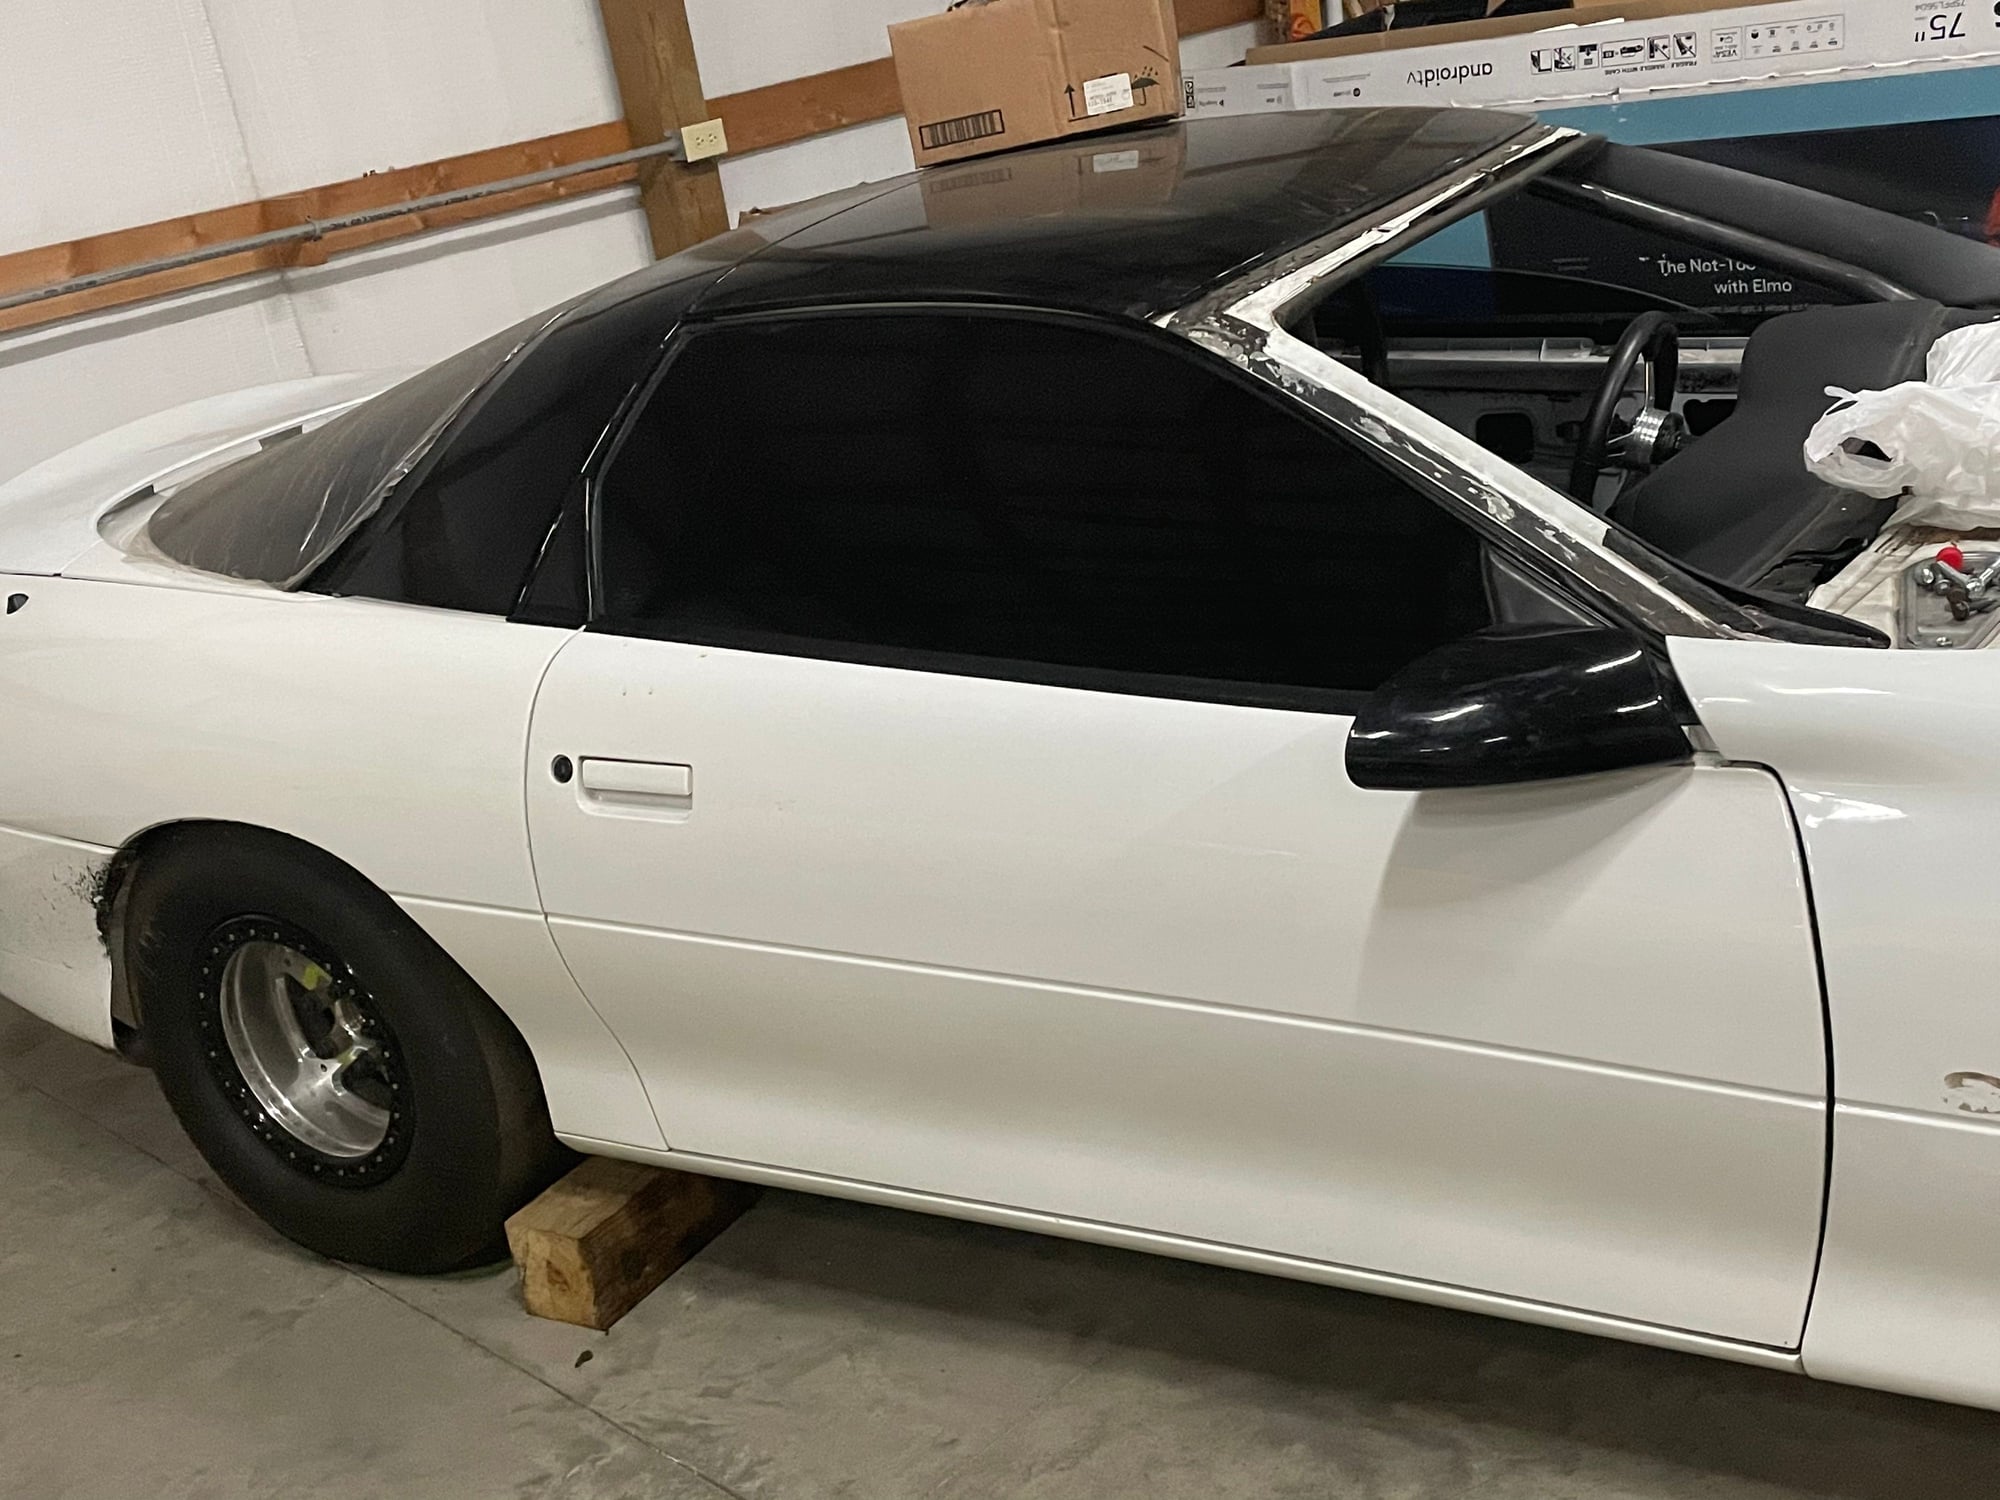 2000 Chevrolet Camaro - Race car roller FS - Used - VIN 1z1gbf12376512389 - 1 Miles - Bowling Green, KY 90210, United States